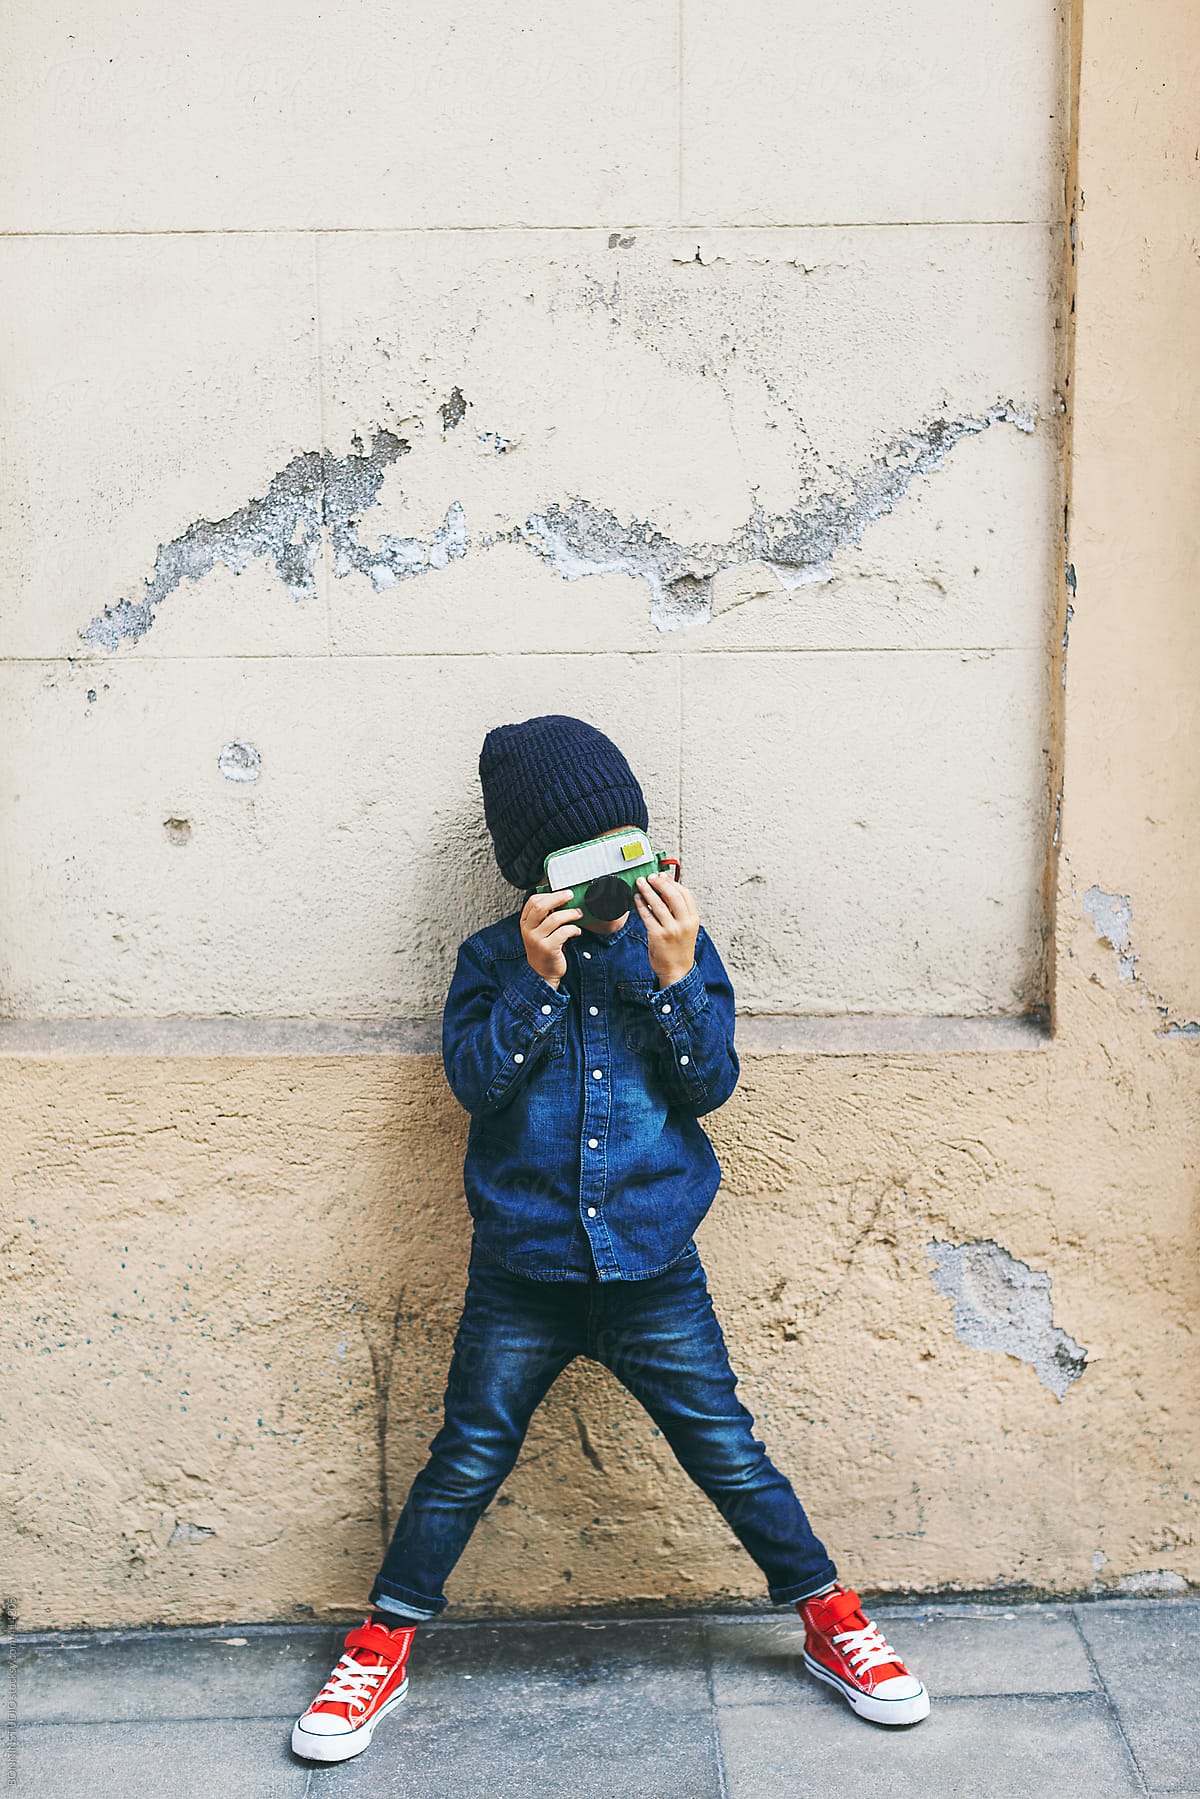 Little boy wearing denim clothes with diy camera. Child standing in front a wall on street.